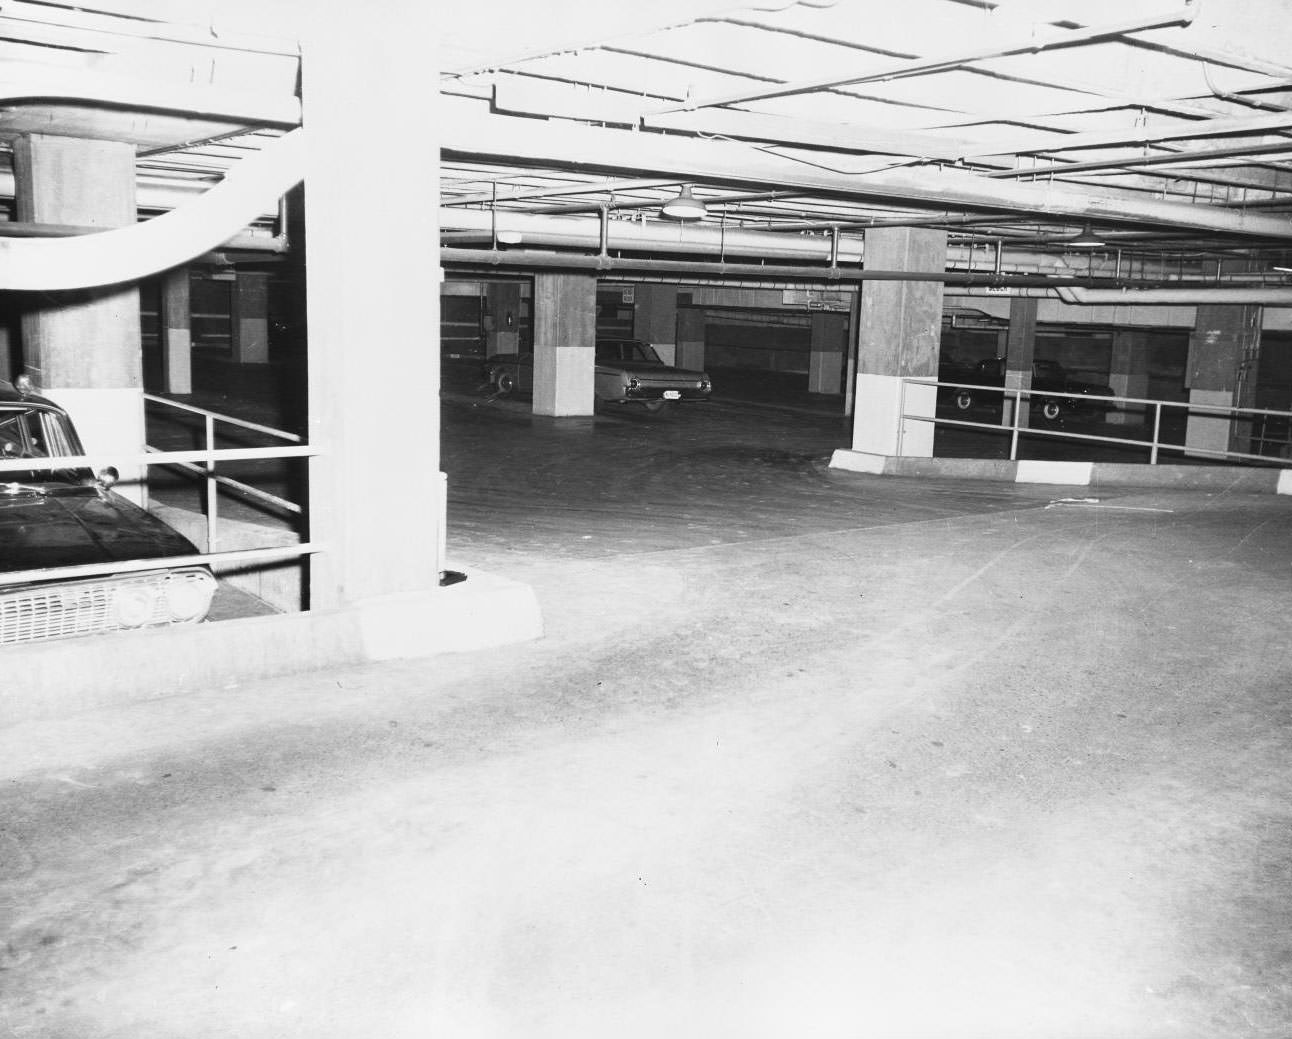 City Hall Basement with Dallas Police Department Vehicle, 1960s